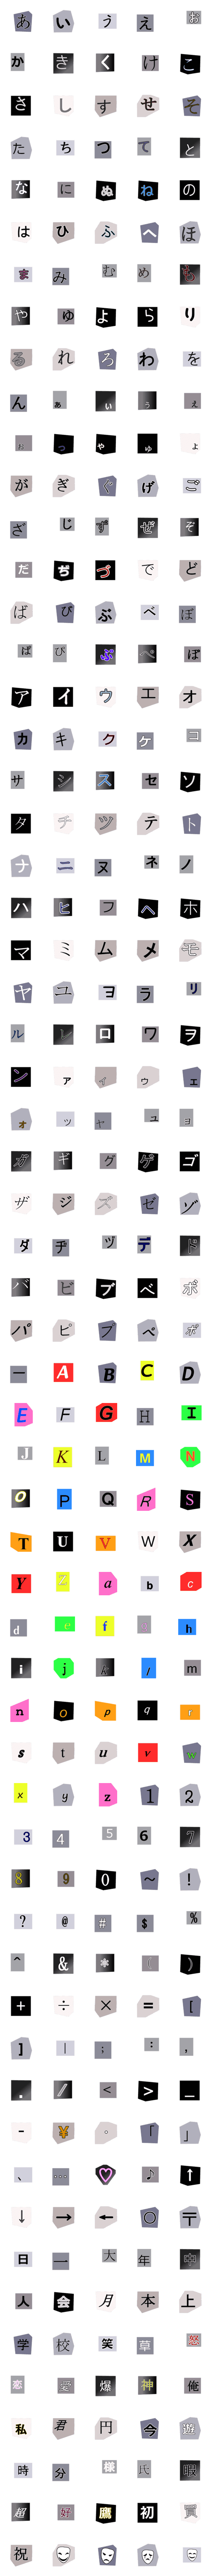 [LINE絵文字]暗号のような文字 怪文書2の画像一覧